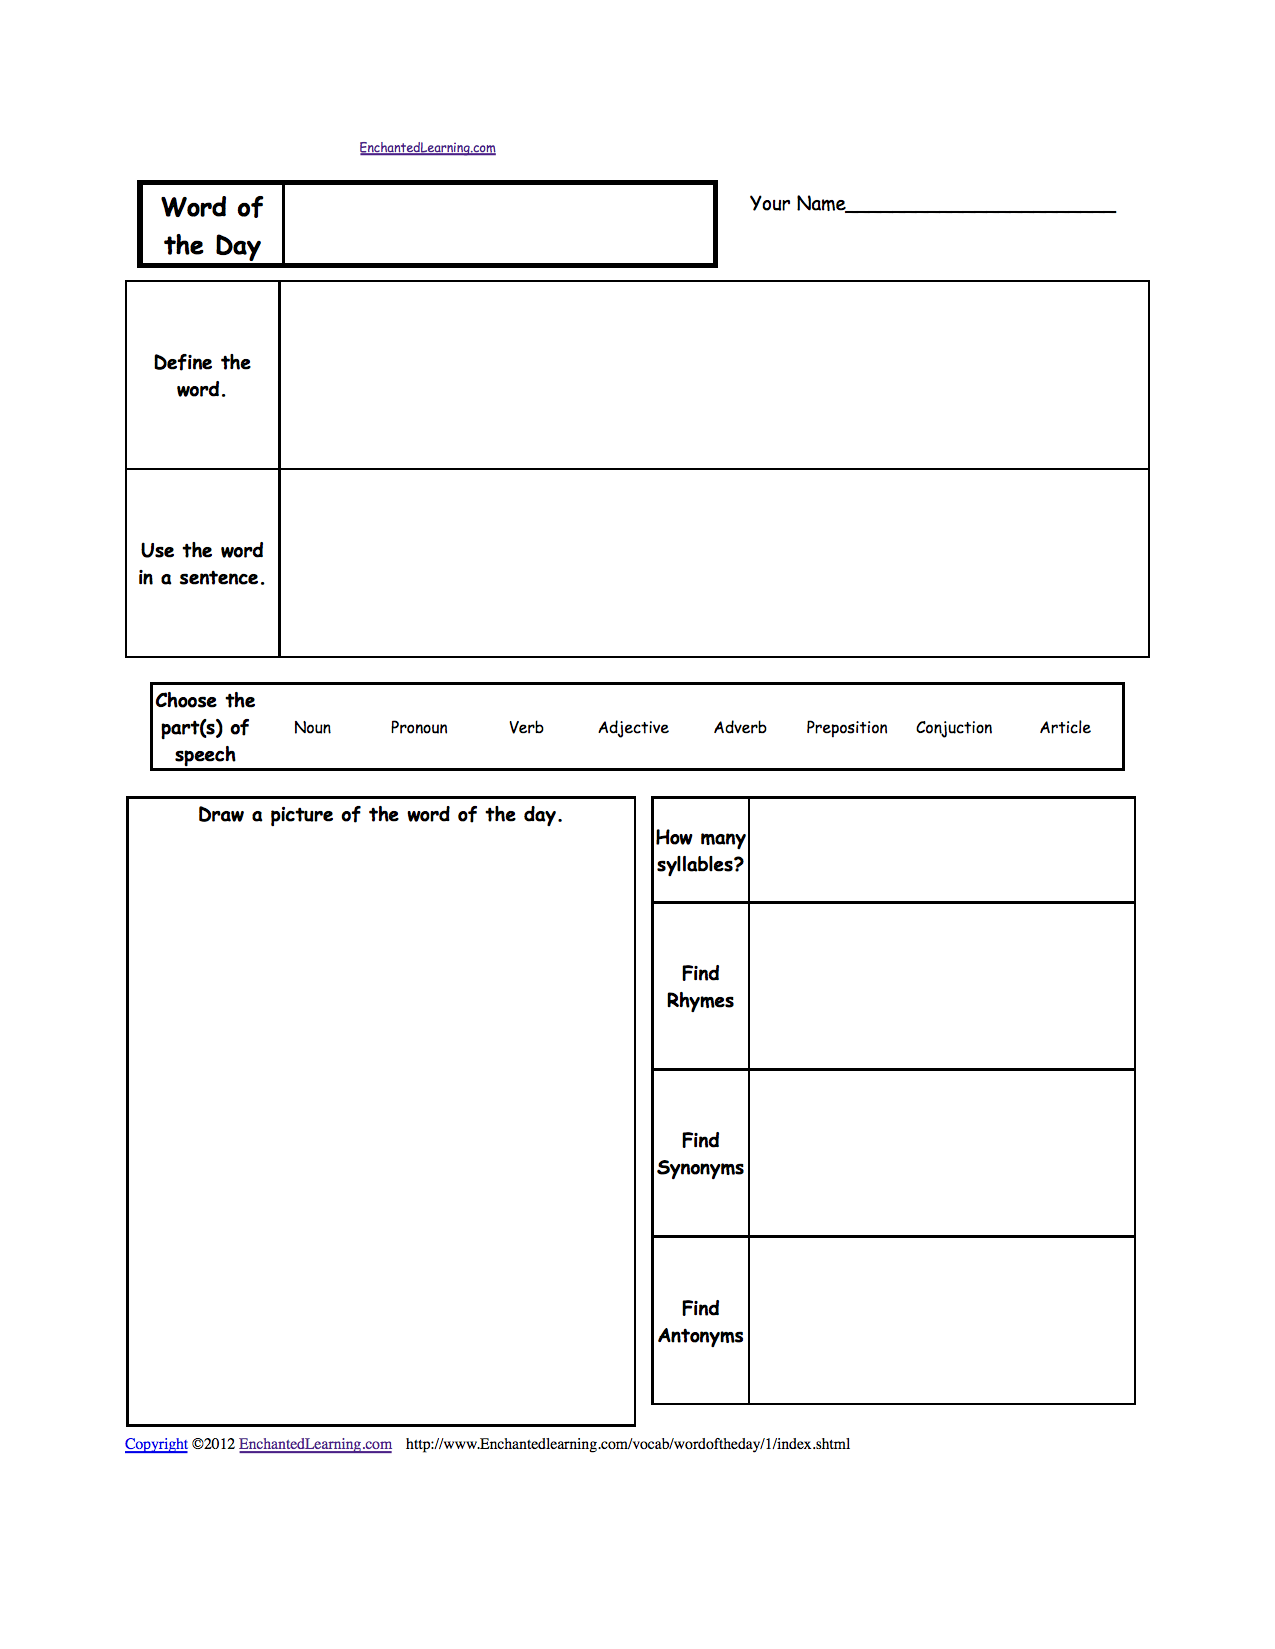 Word of the Day Worksheets - EnchantedLearning.com Within Vocabulary Words Worksheet Template